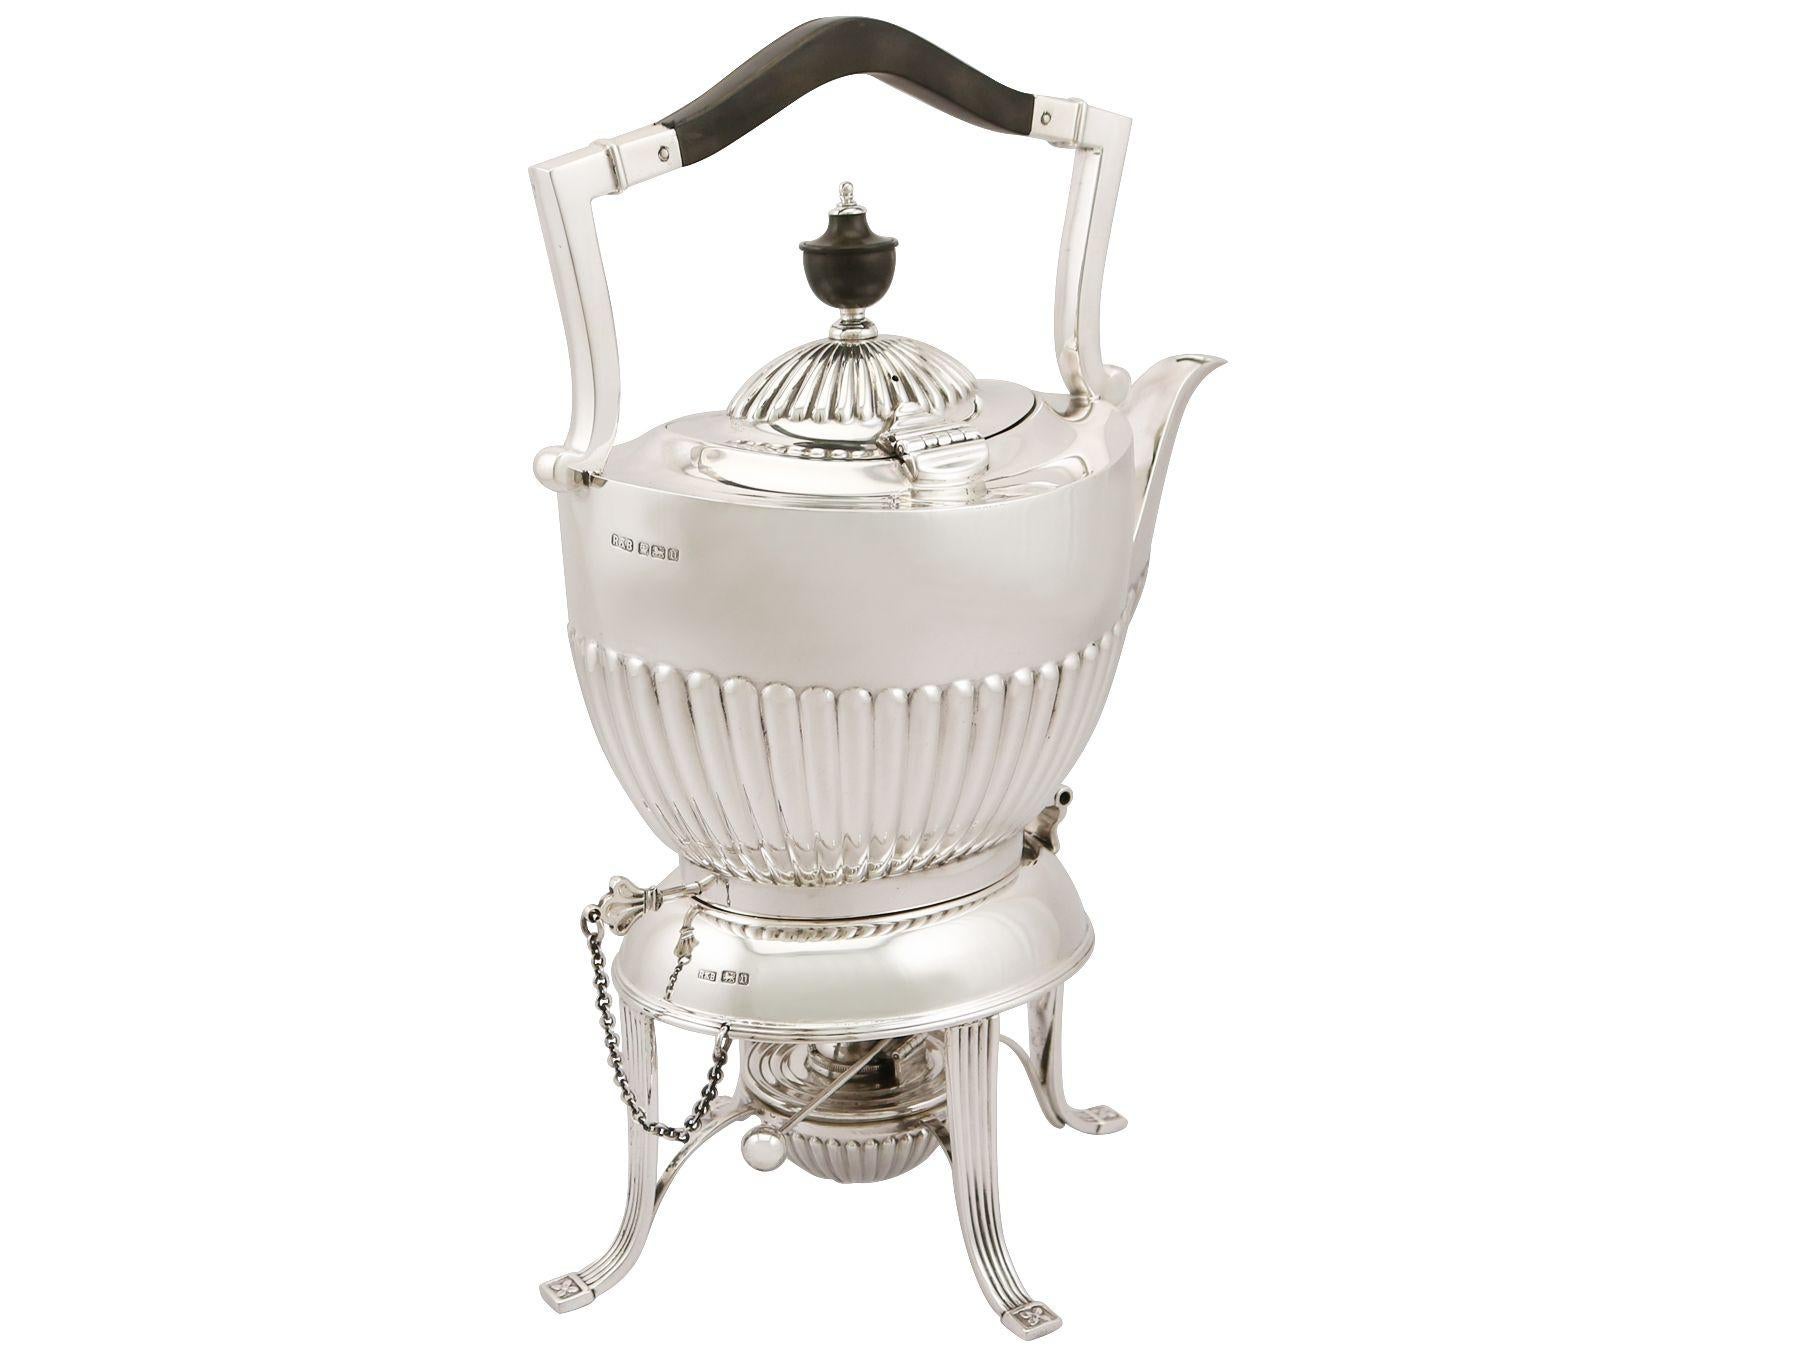 An exceptional, fine and impressive antique George V English sterling silver spirit tea kettle made in the Queen Anne style; an addition to our antique silver teaware collection.

This exceptional antique George V sterling silver spirit kettle on